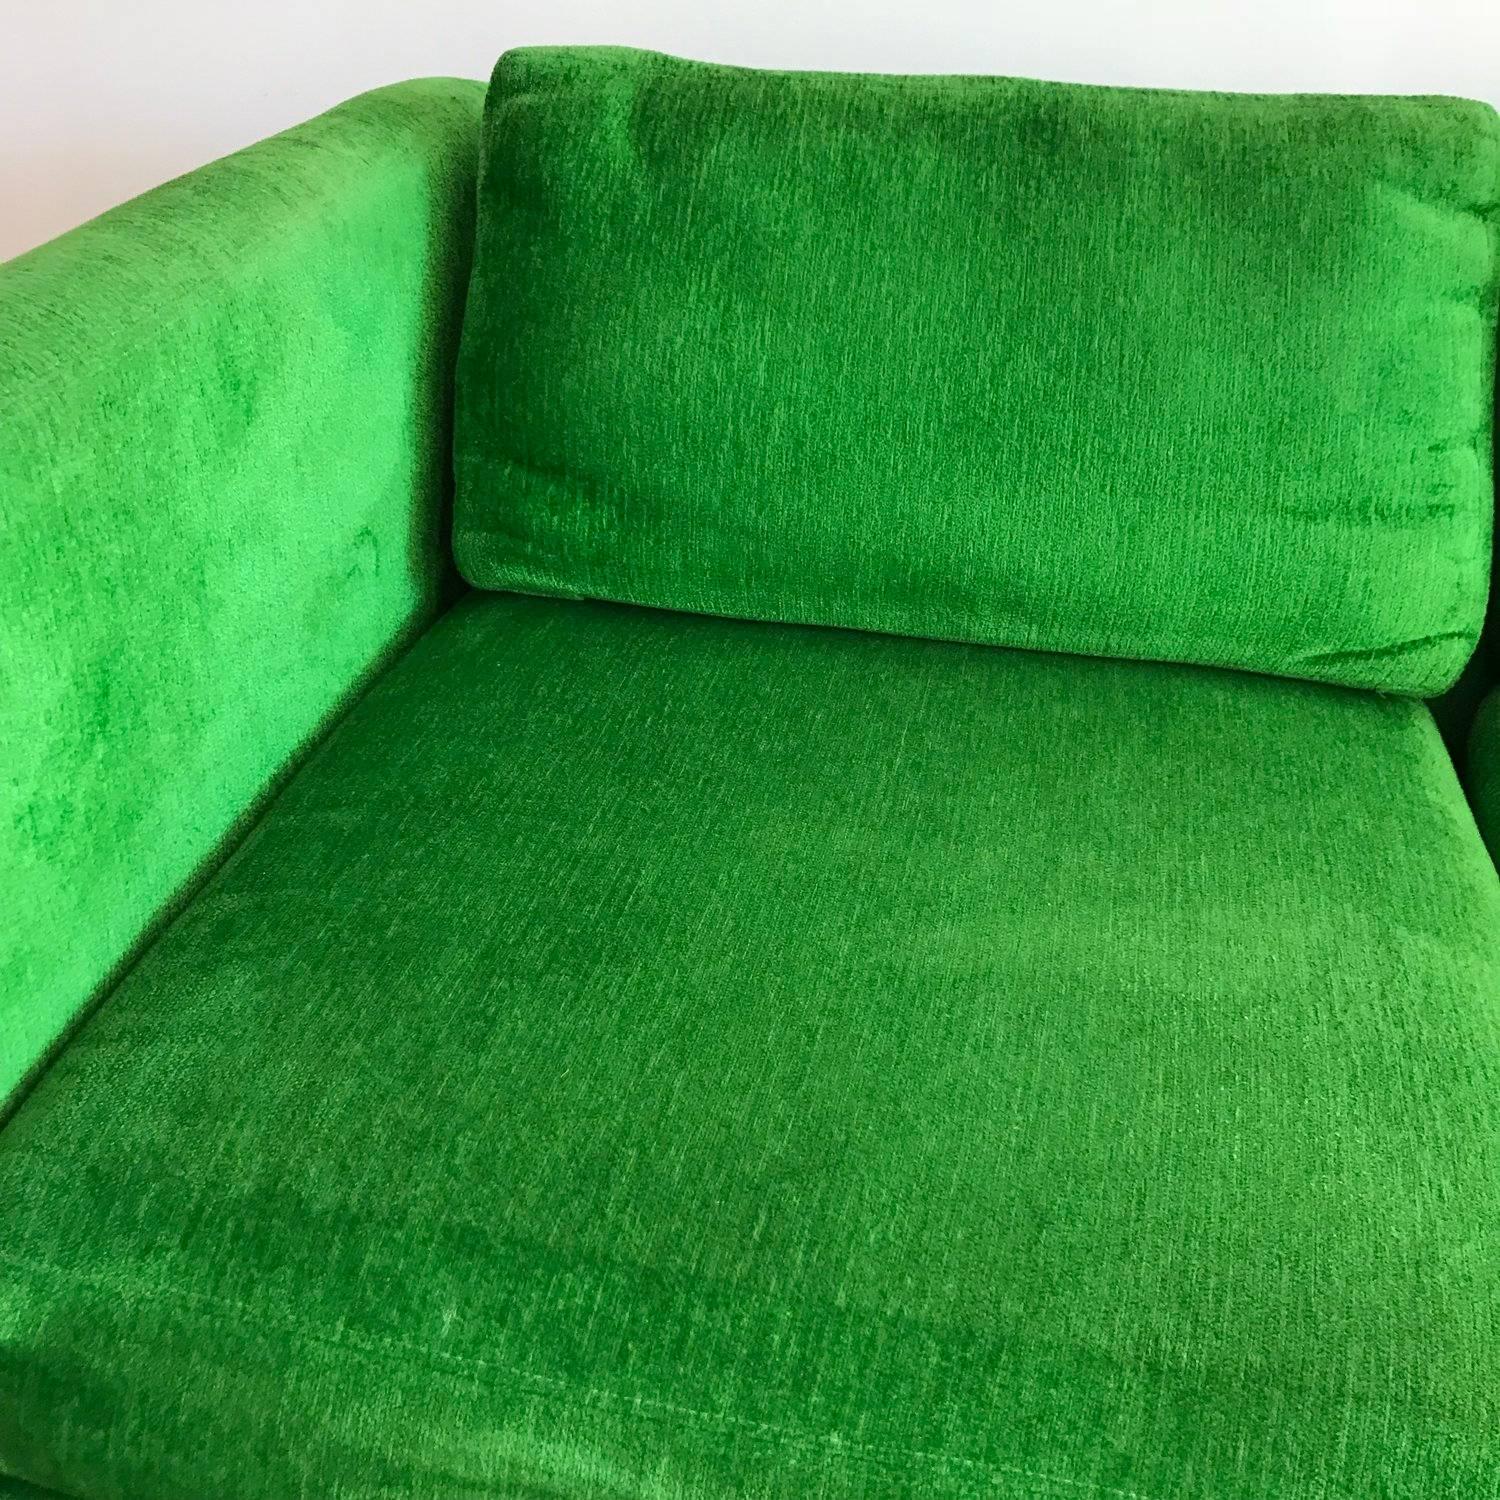 Super fun kelly green velvet sofa or loveseat by Selig sold through W and J Sloane, NY. Excellent vintage condition, still has a yard of original fabric and paper work that was kept. Very light signs of wear on the left side. Classic square boxy